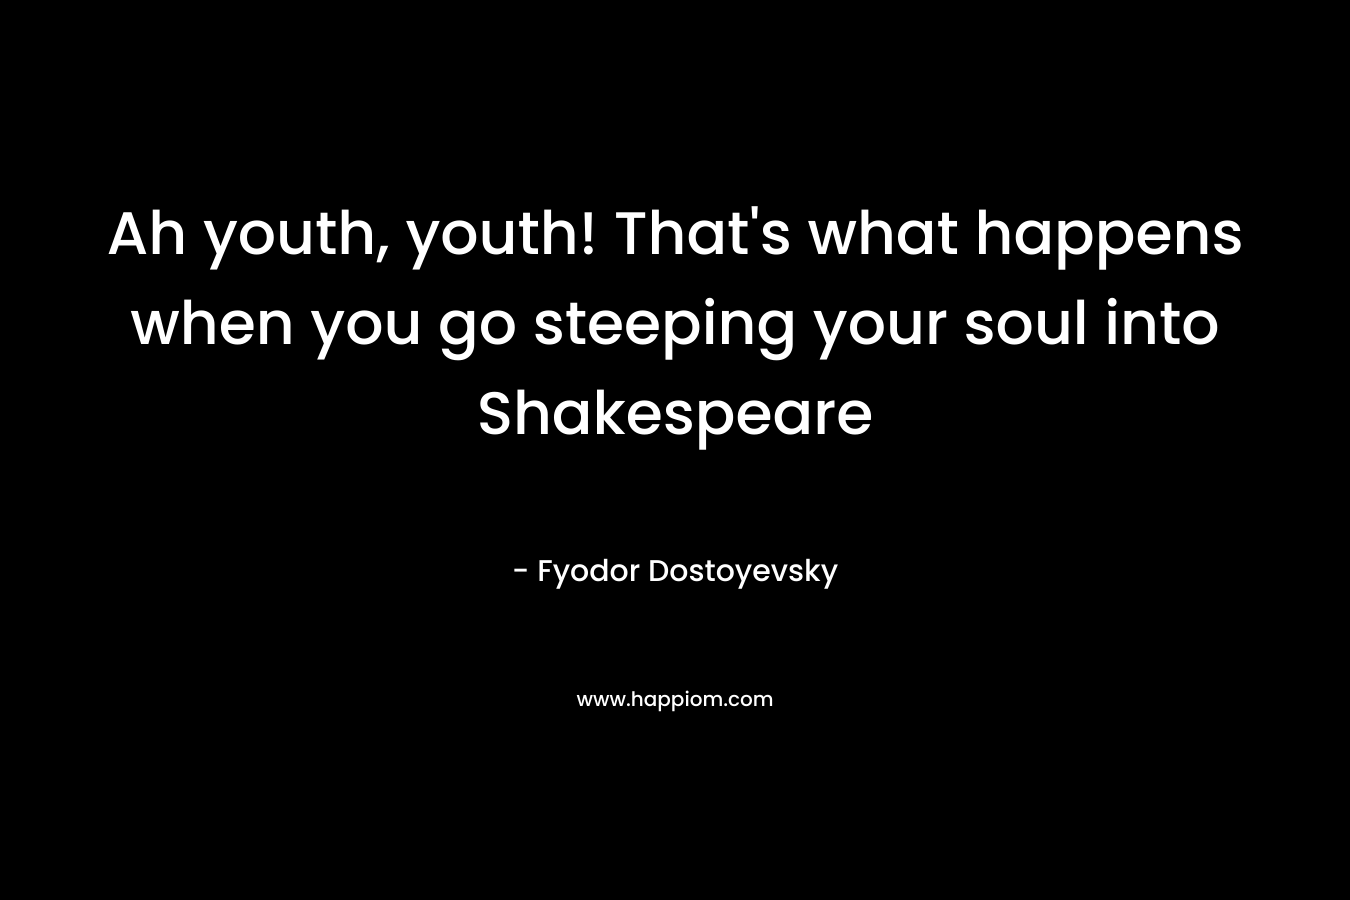 Ah youth, youth! That’s what happens when you go steeping your soul into Shakespeare – Fyodor Dostoyevsky